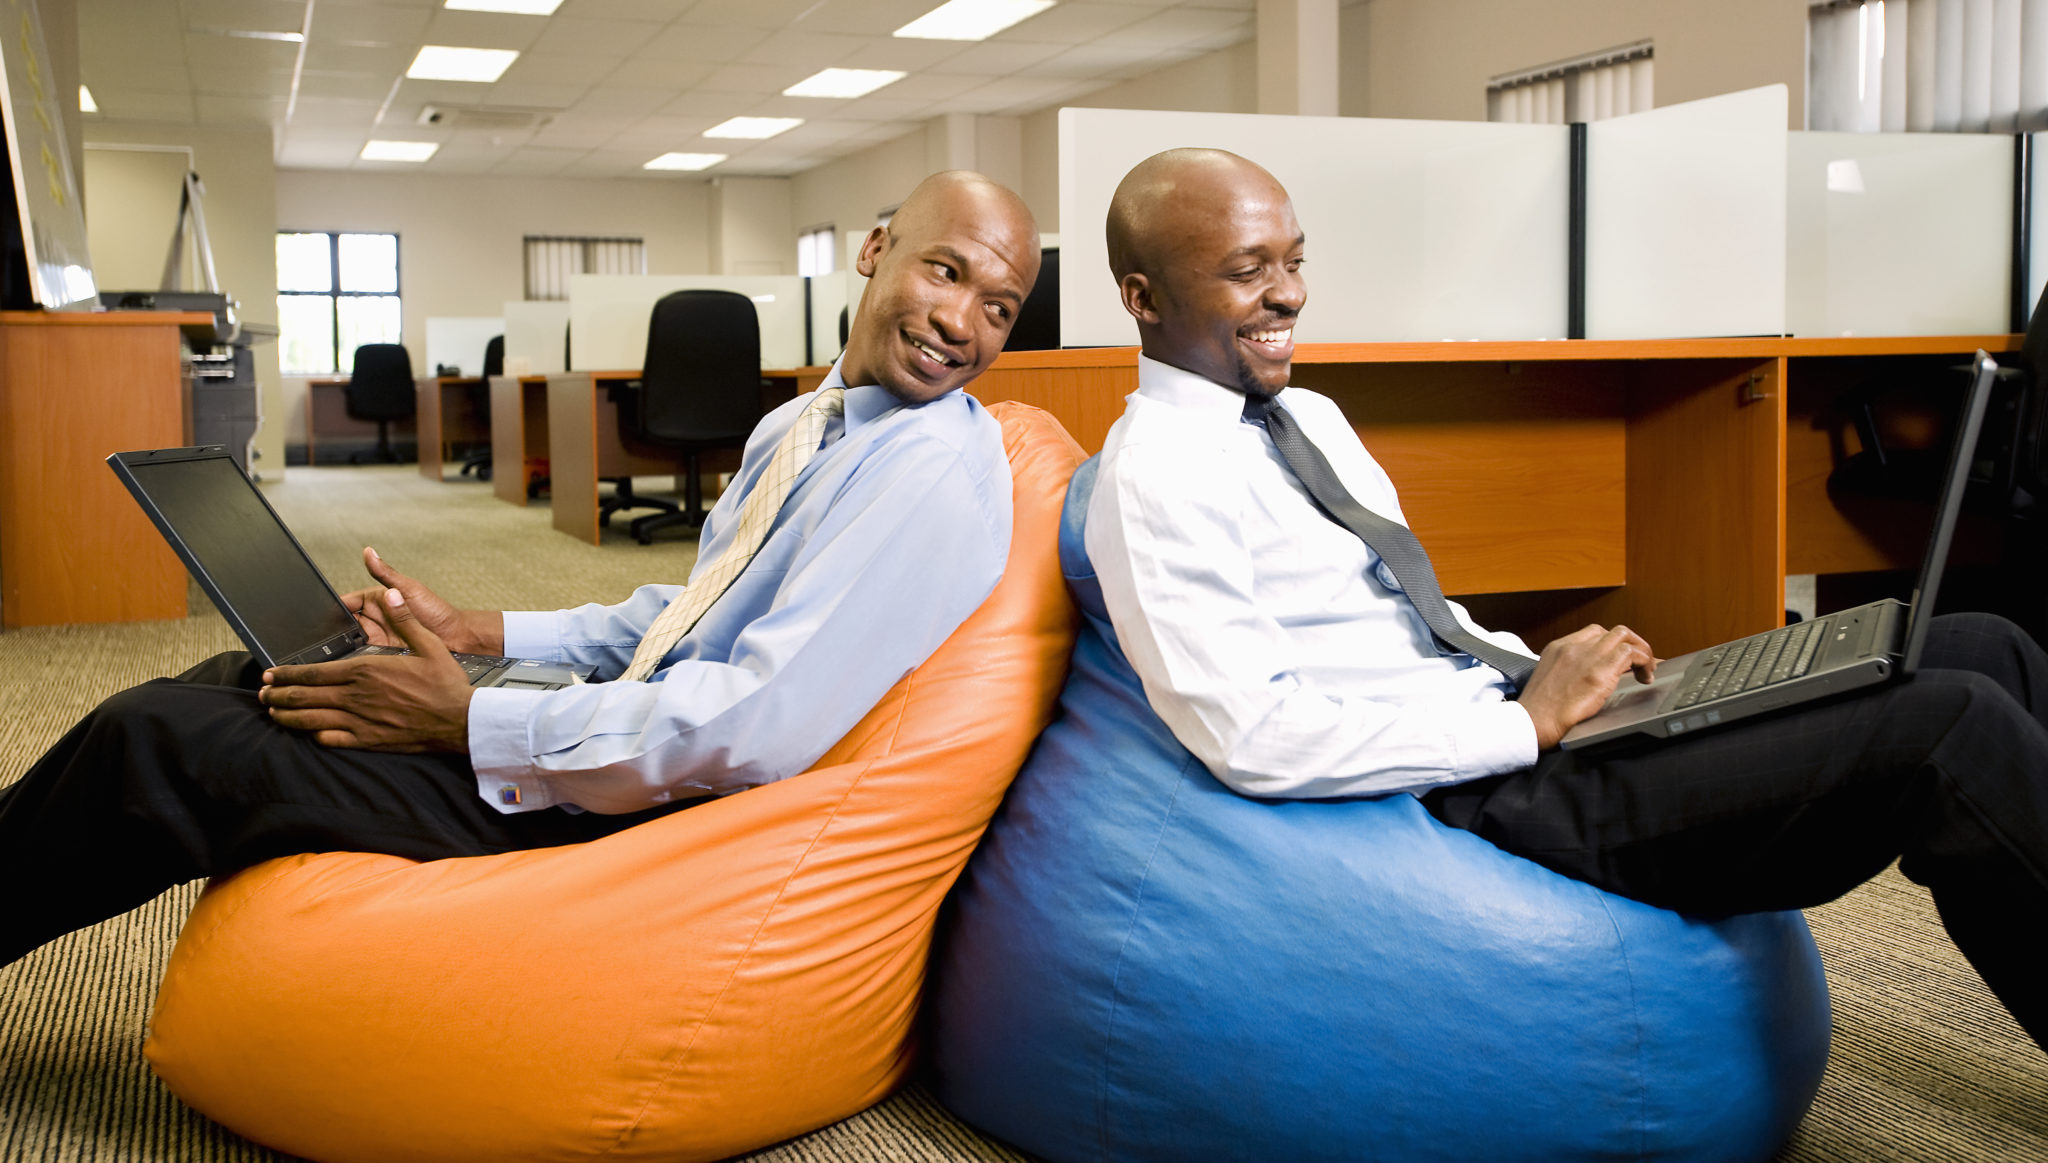 Two businessmen compare work on laptops while sitting on beanbags. Pretoria, South Africa